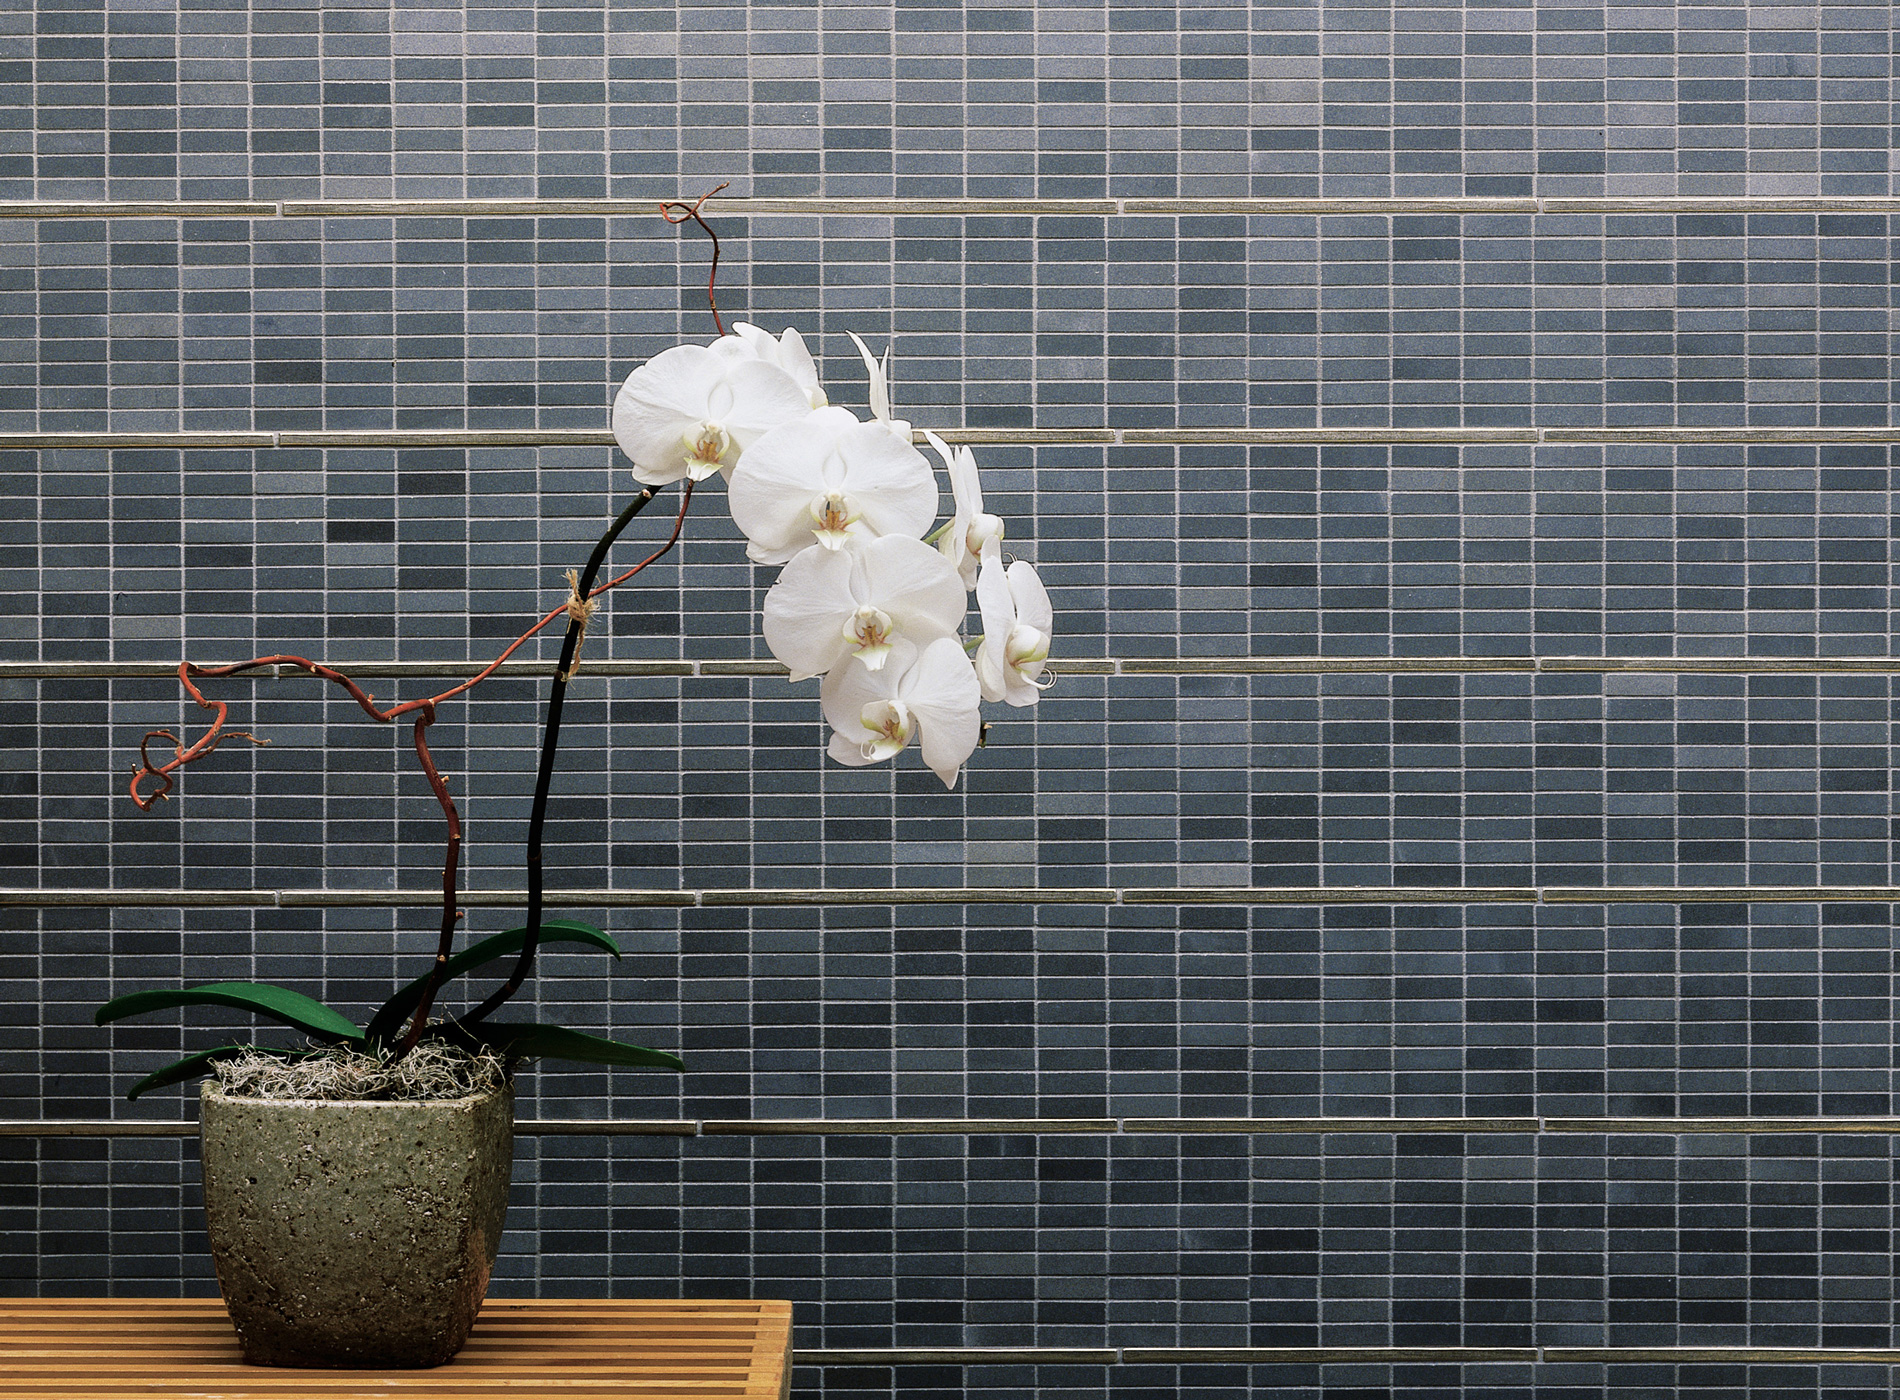 Foundry Art Straight Line metal accent liner tile with blue and gray stone wall installation